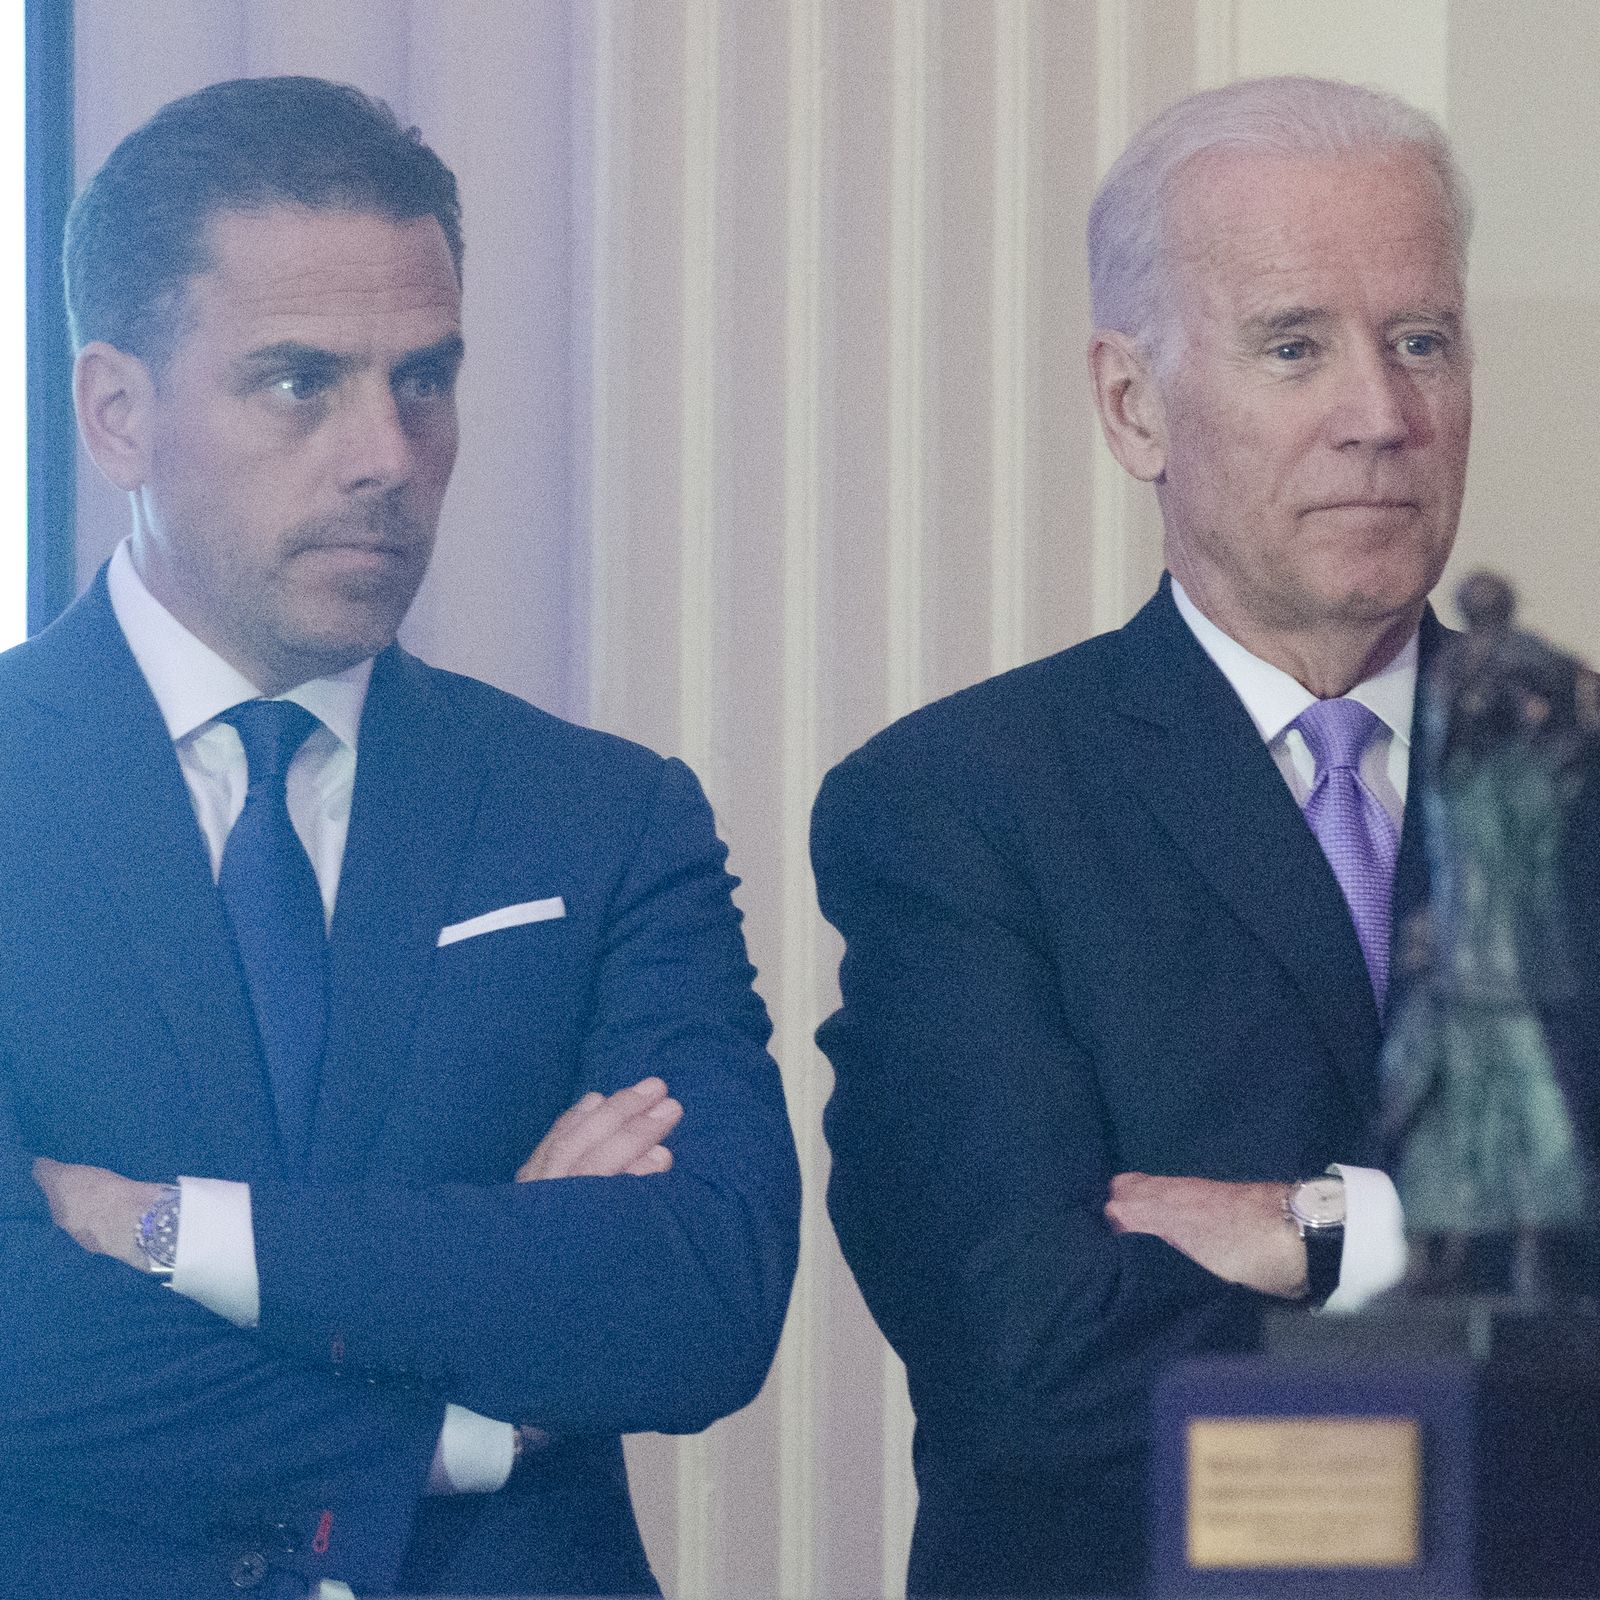 Fact check: What Joe and Hunter Biden actually did in Ukraine